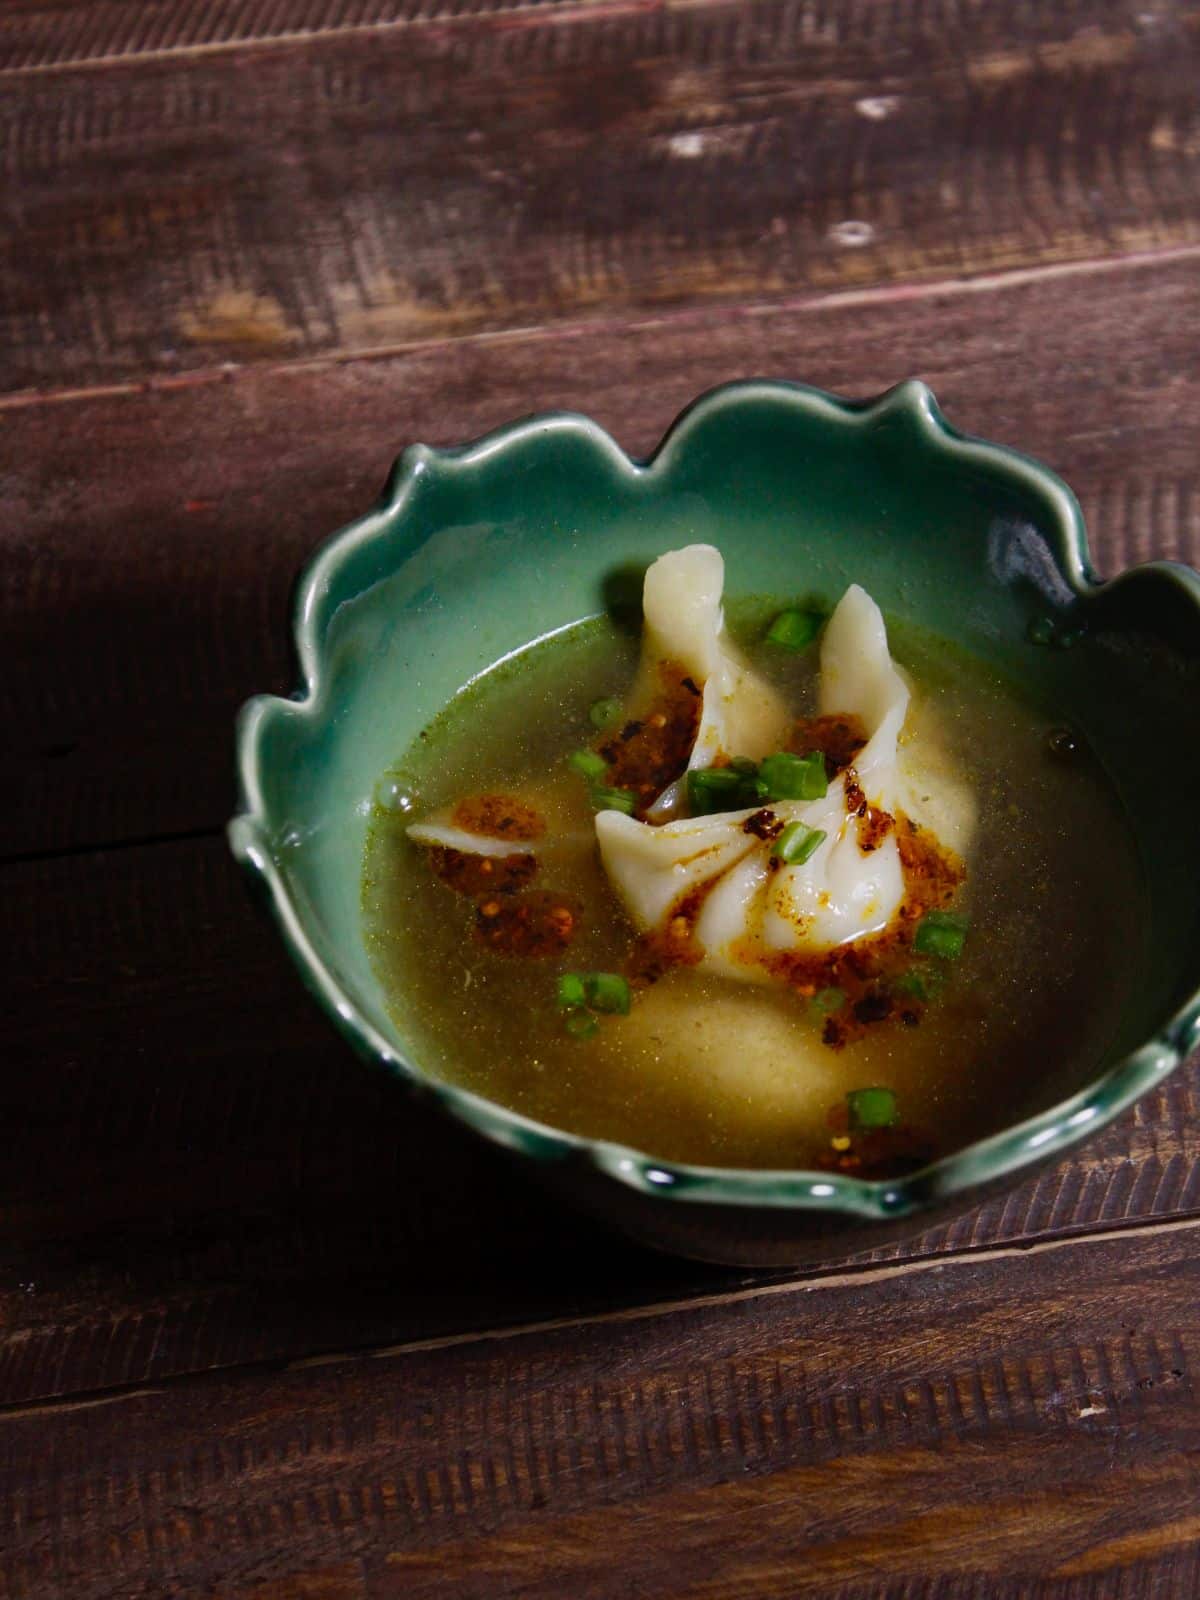 garnish dumplings with warm broth with chilli and coriander leaves and enjoy 